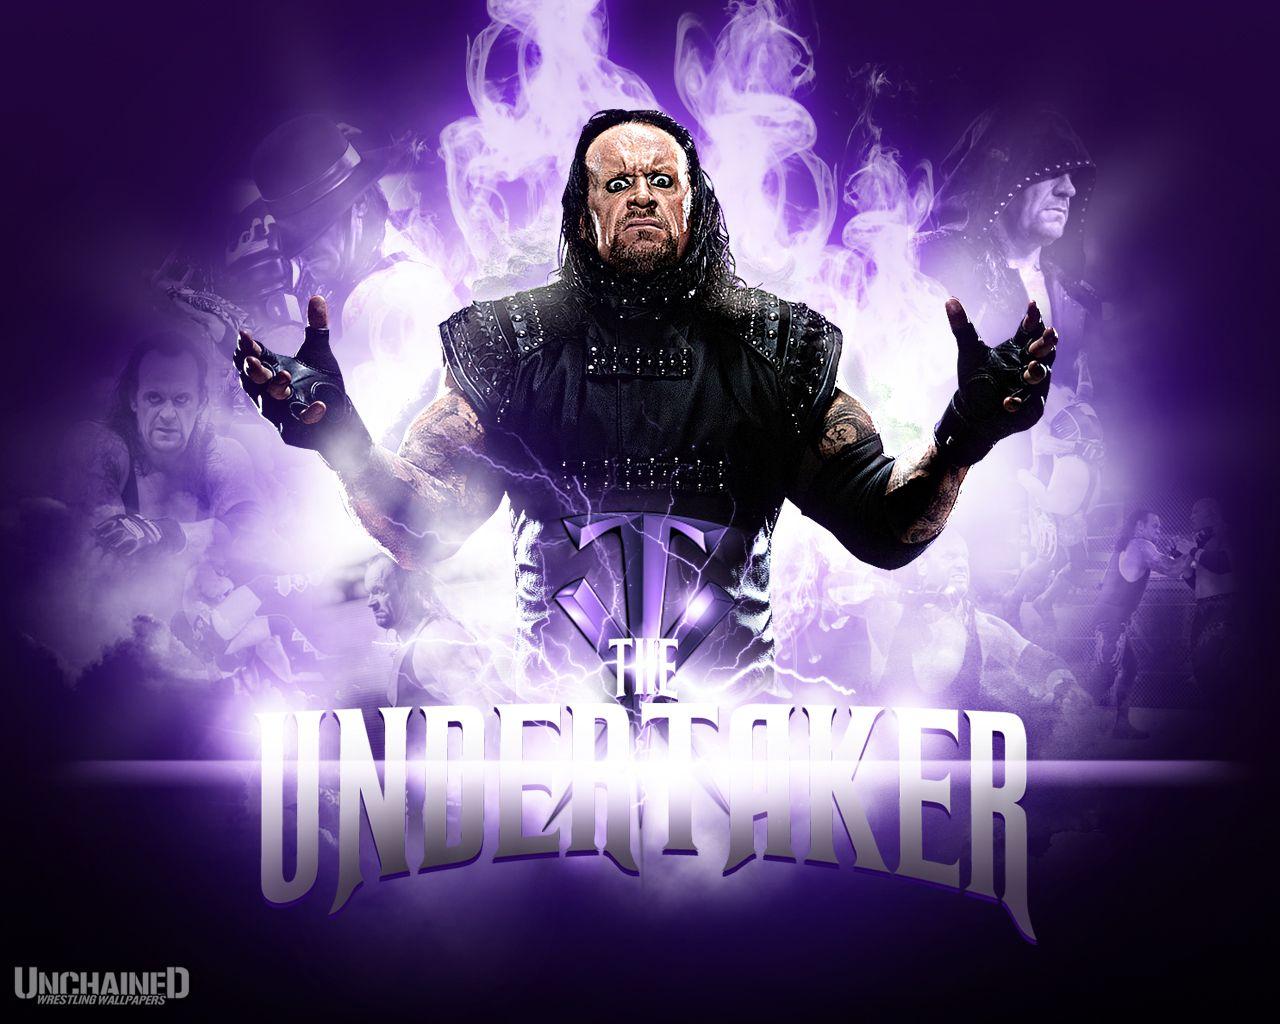 NEW Bray Wyatt and Undertaker WWE wallpaper (mobile and poster)! - Kupy  Wrestling Wallpapers